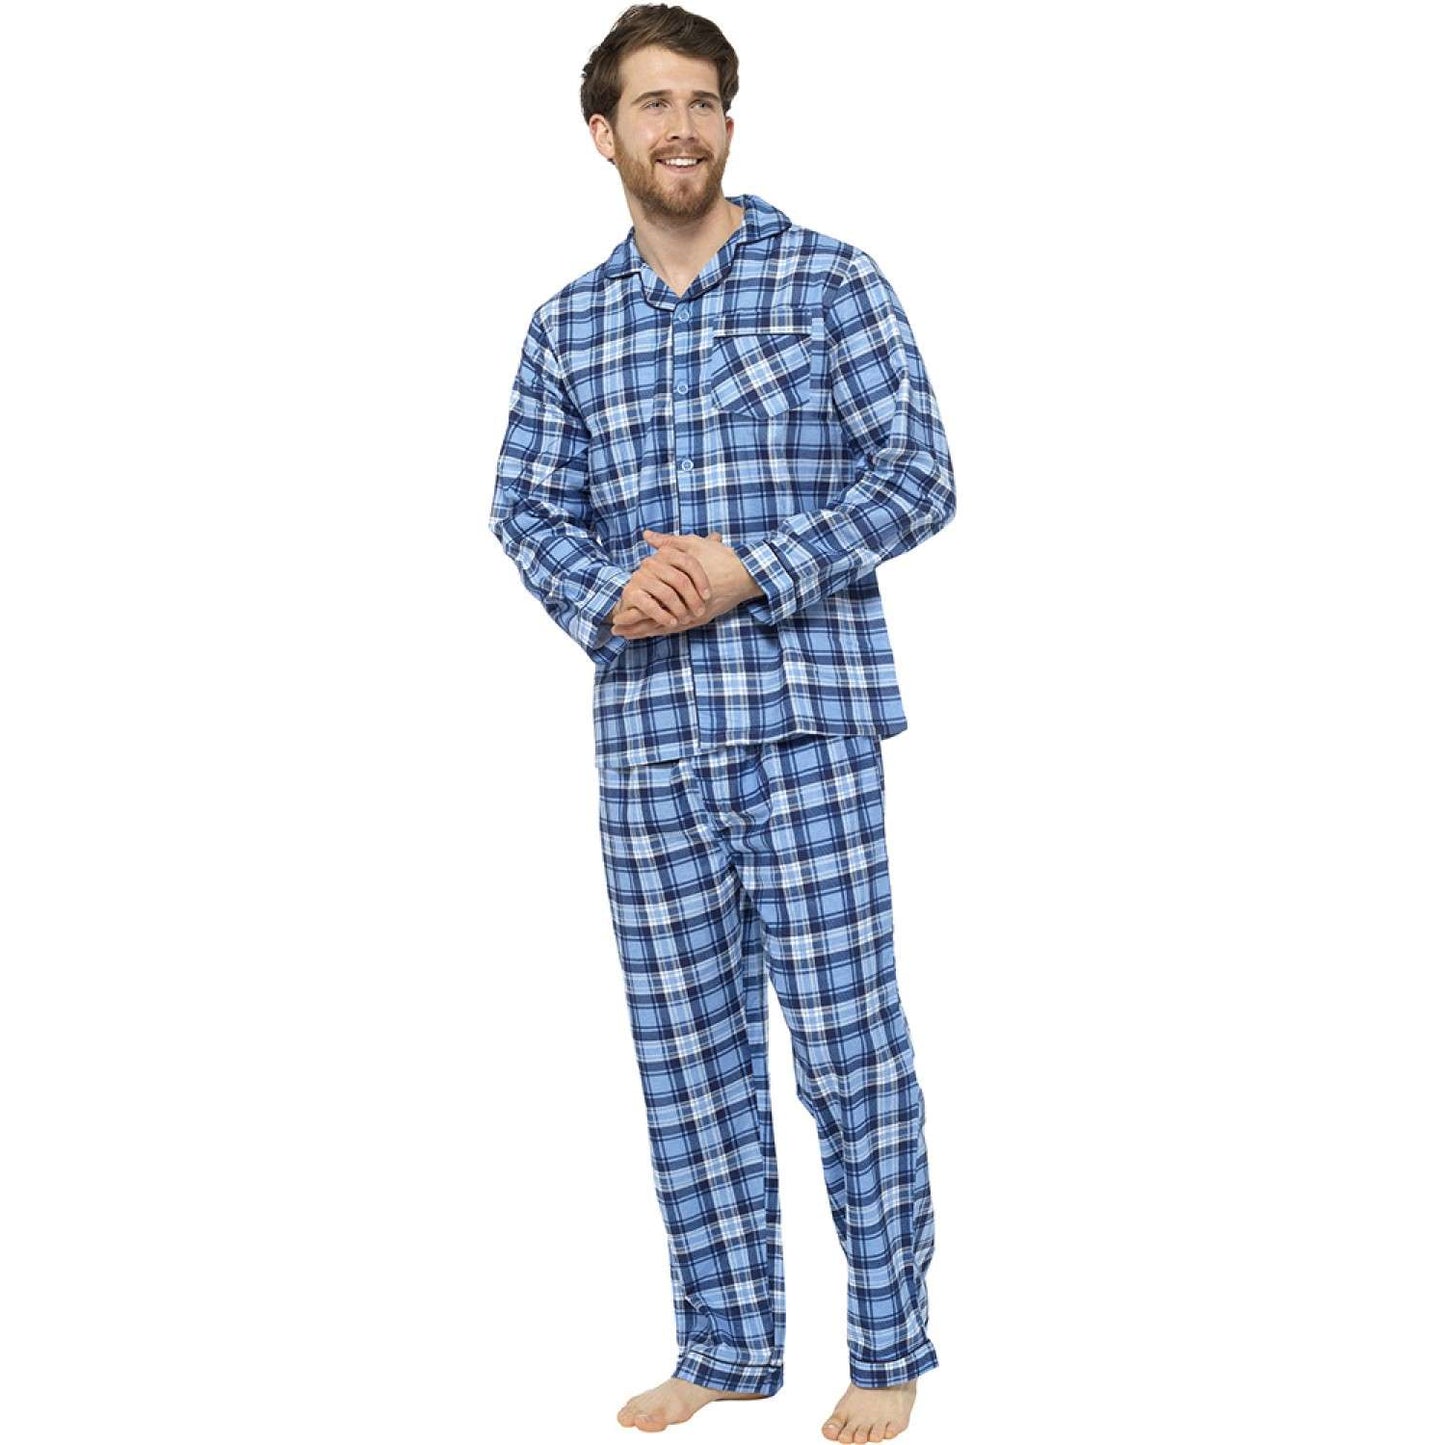 Men's Traditional Style Checked Tartan Brushed Cotton Flannel Pyjamas